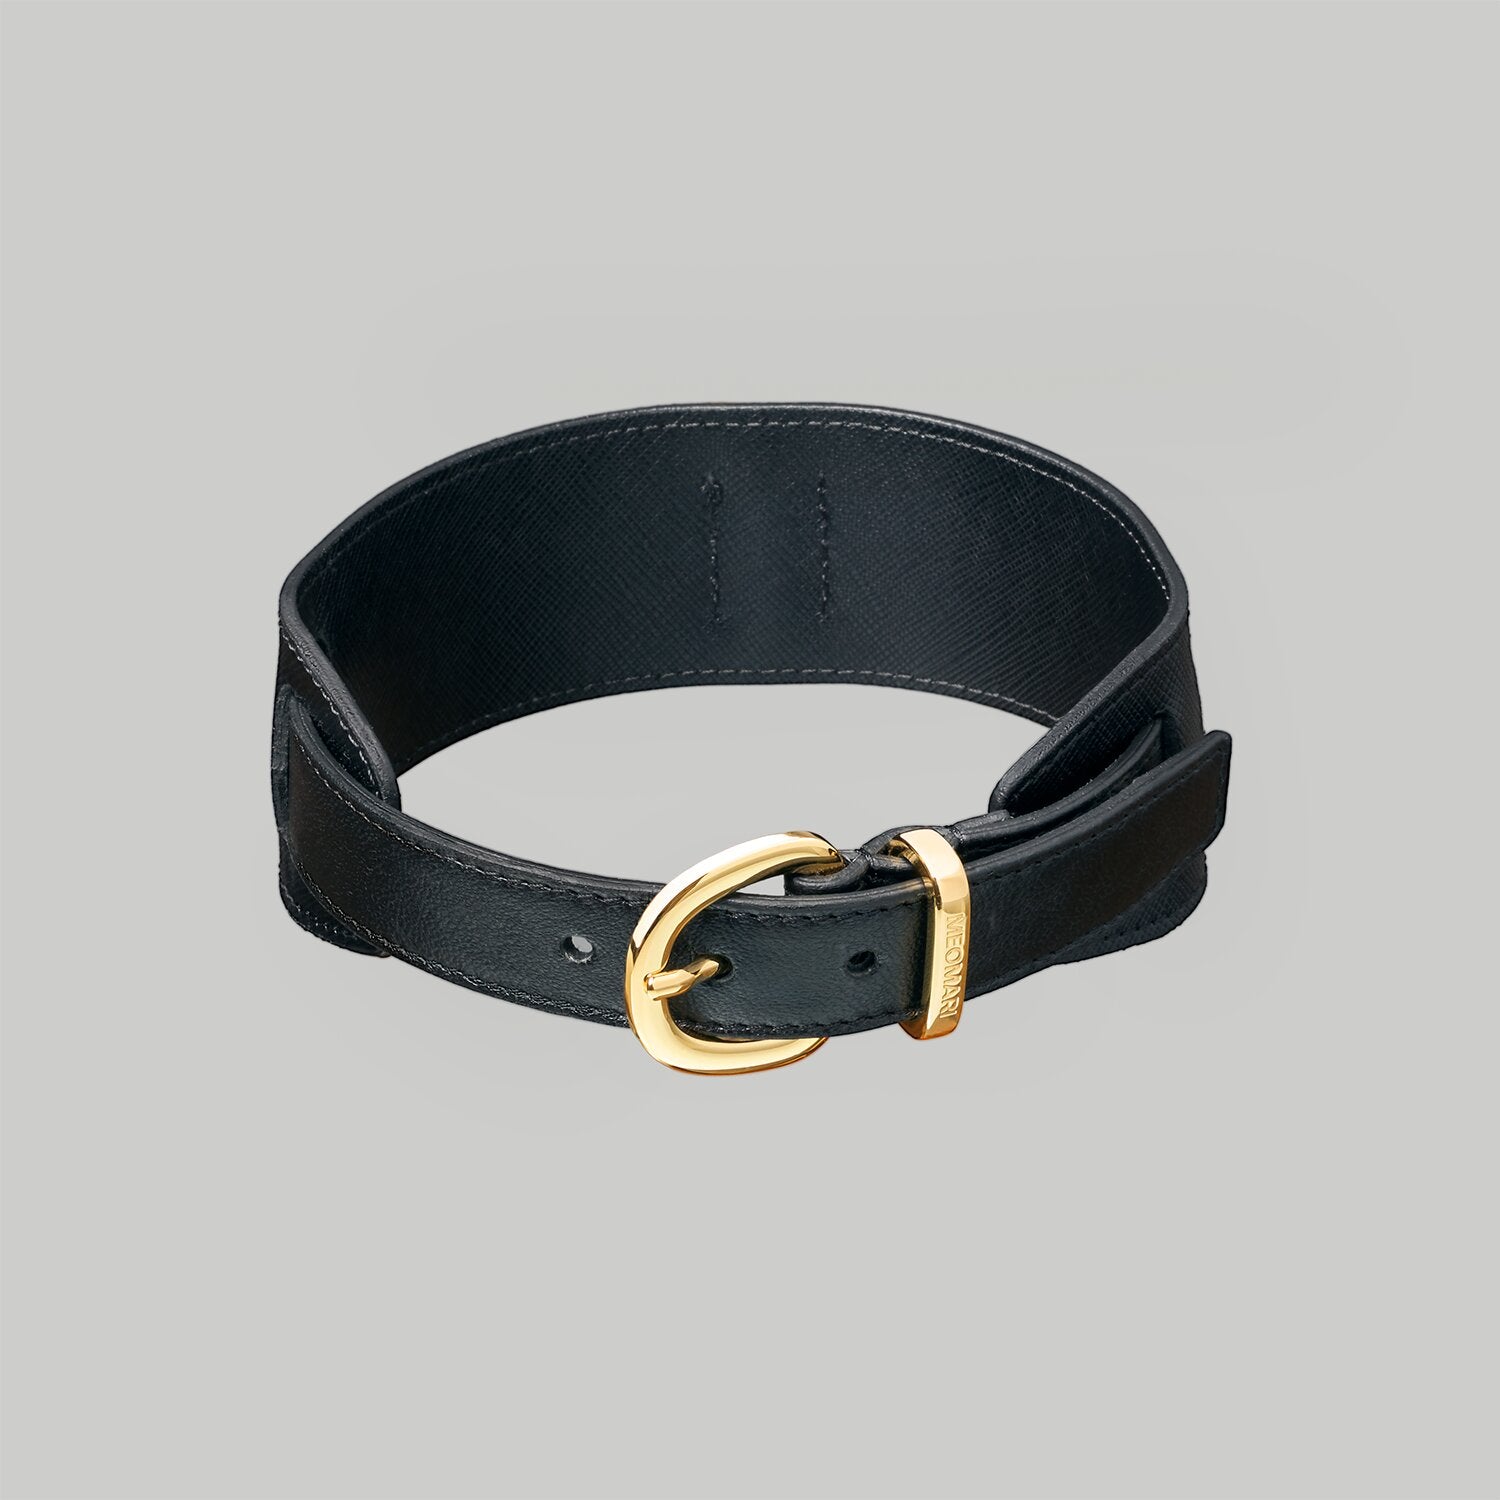 Dog collar in black Saffiano leather with Gold